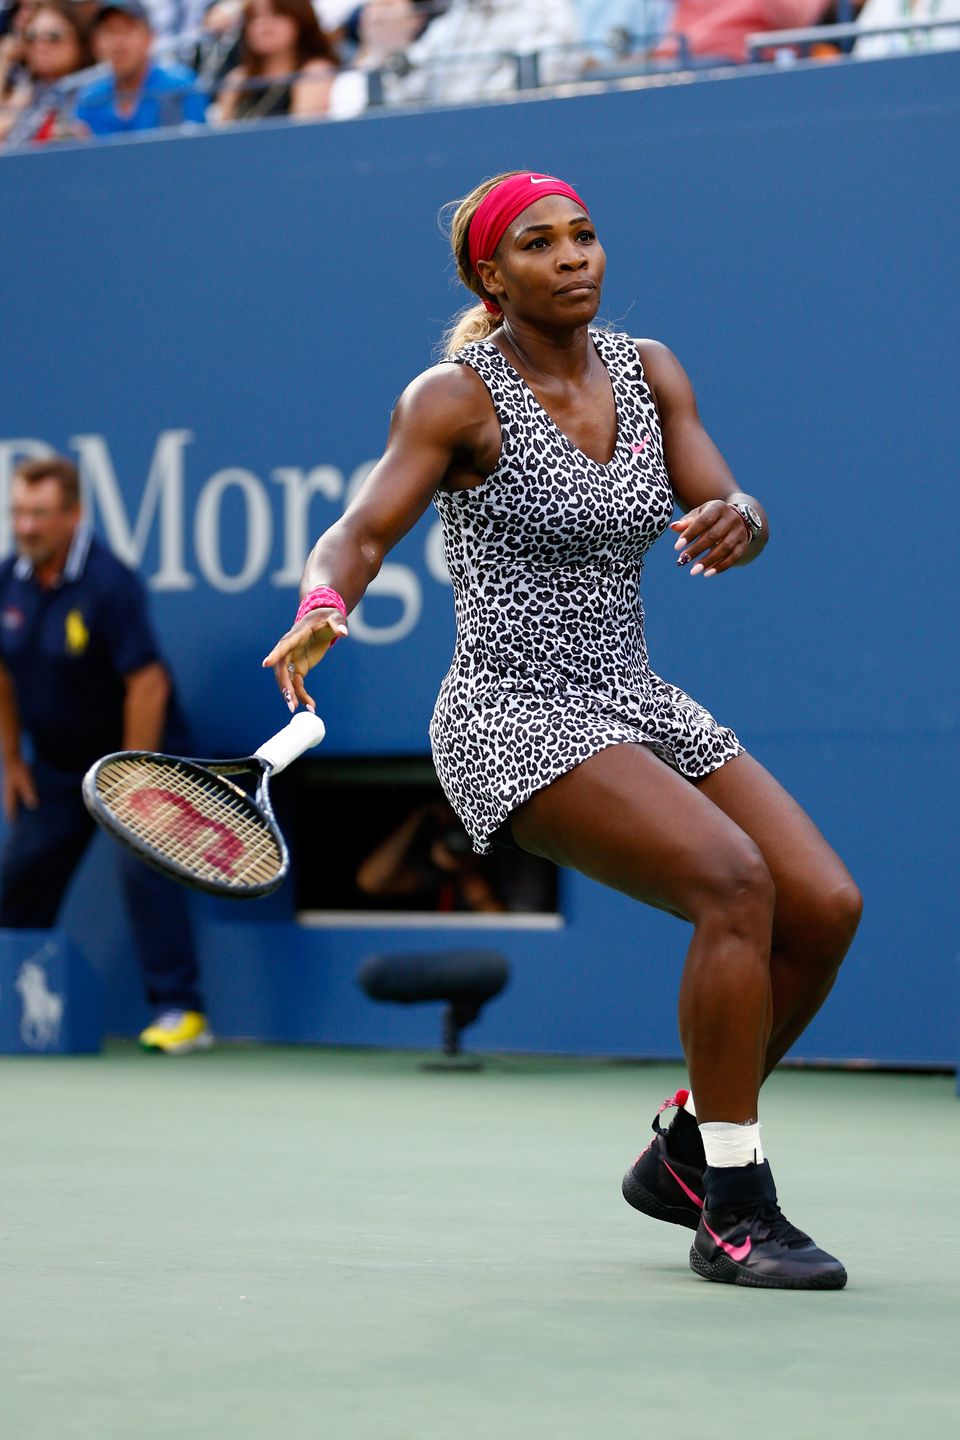 Great Outfits in Fashion History: Venus Williams in a Sporty Louis